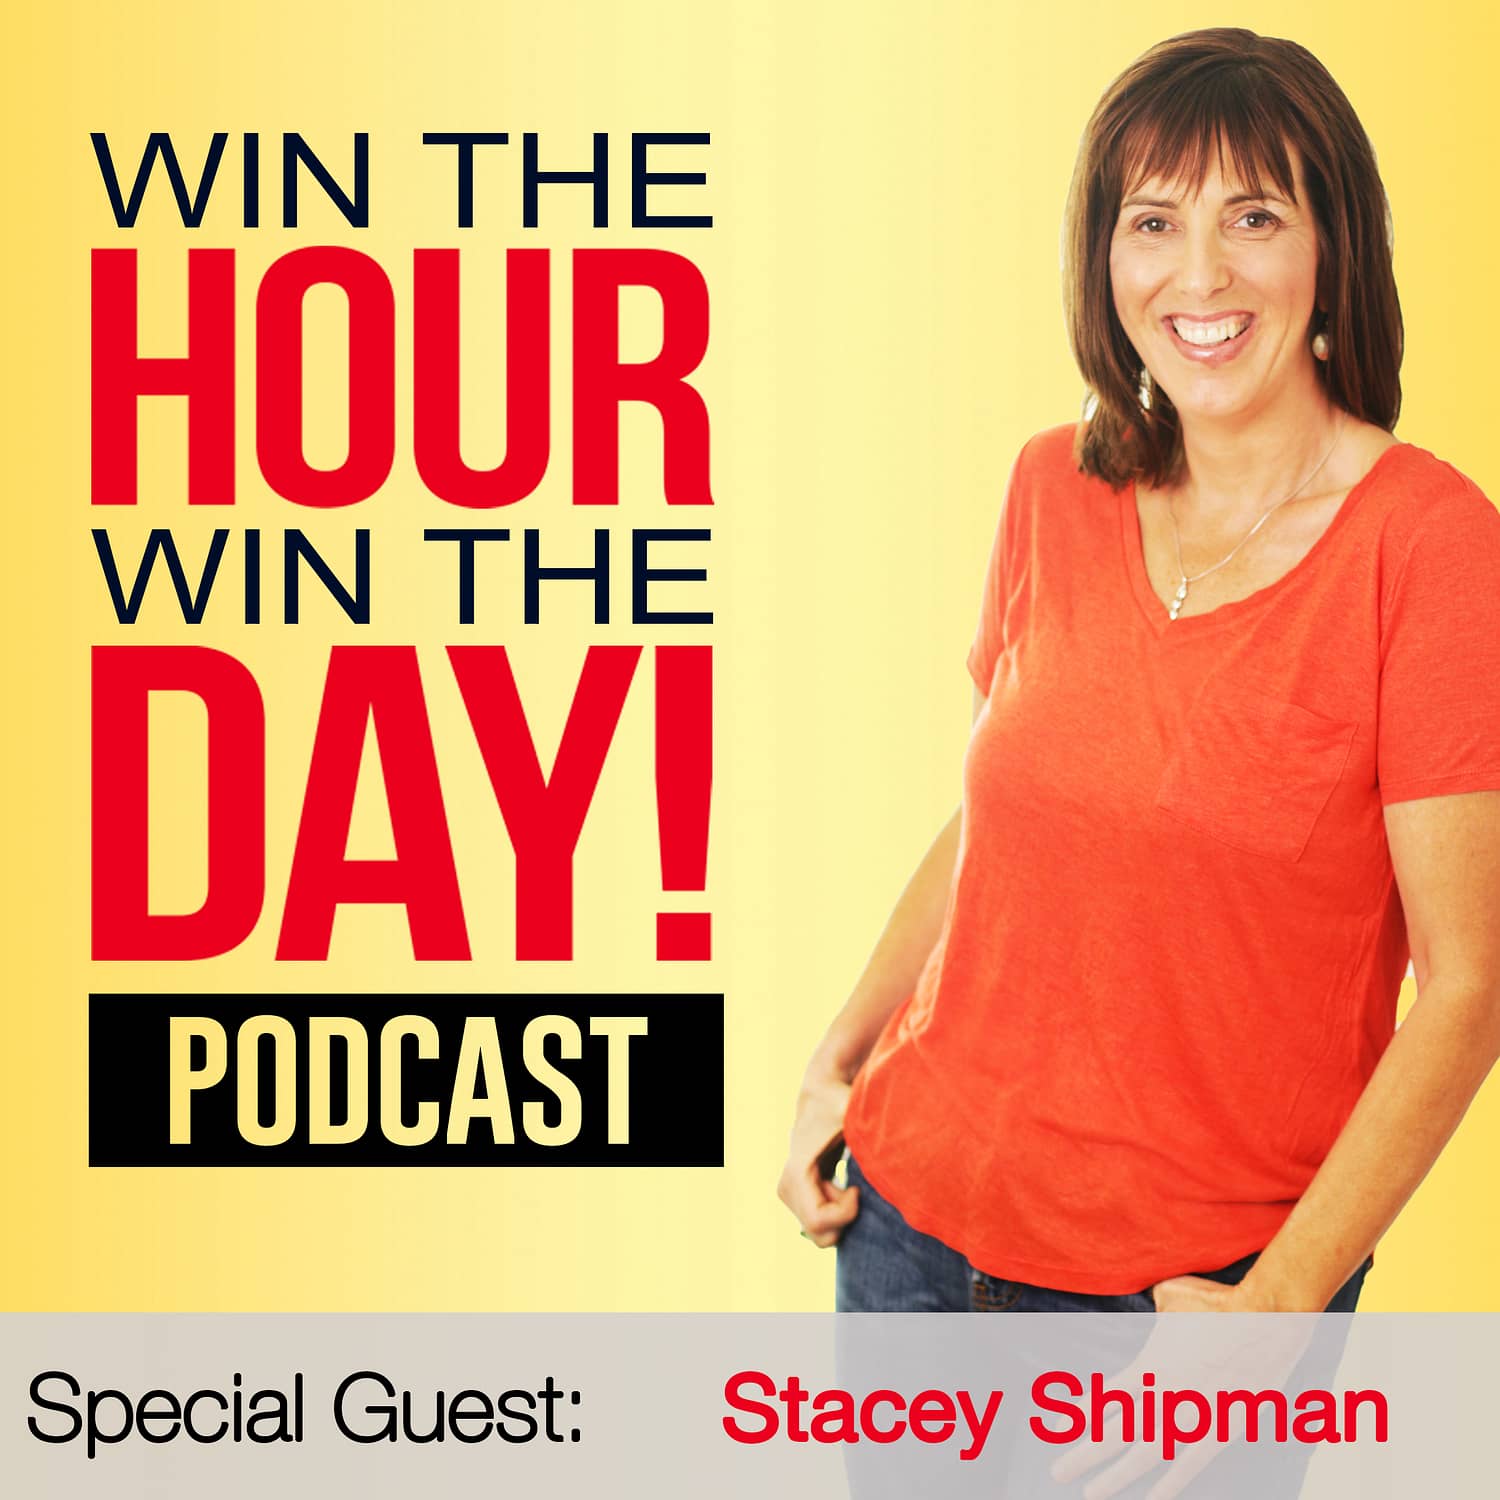 Networking 101: How To Finally Rock Networking! with Stacey Shipman